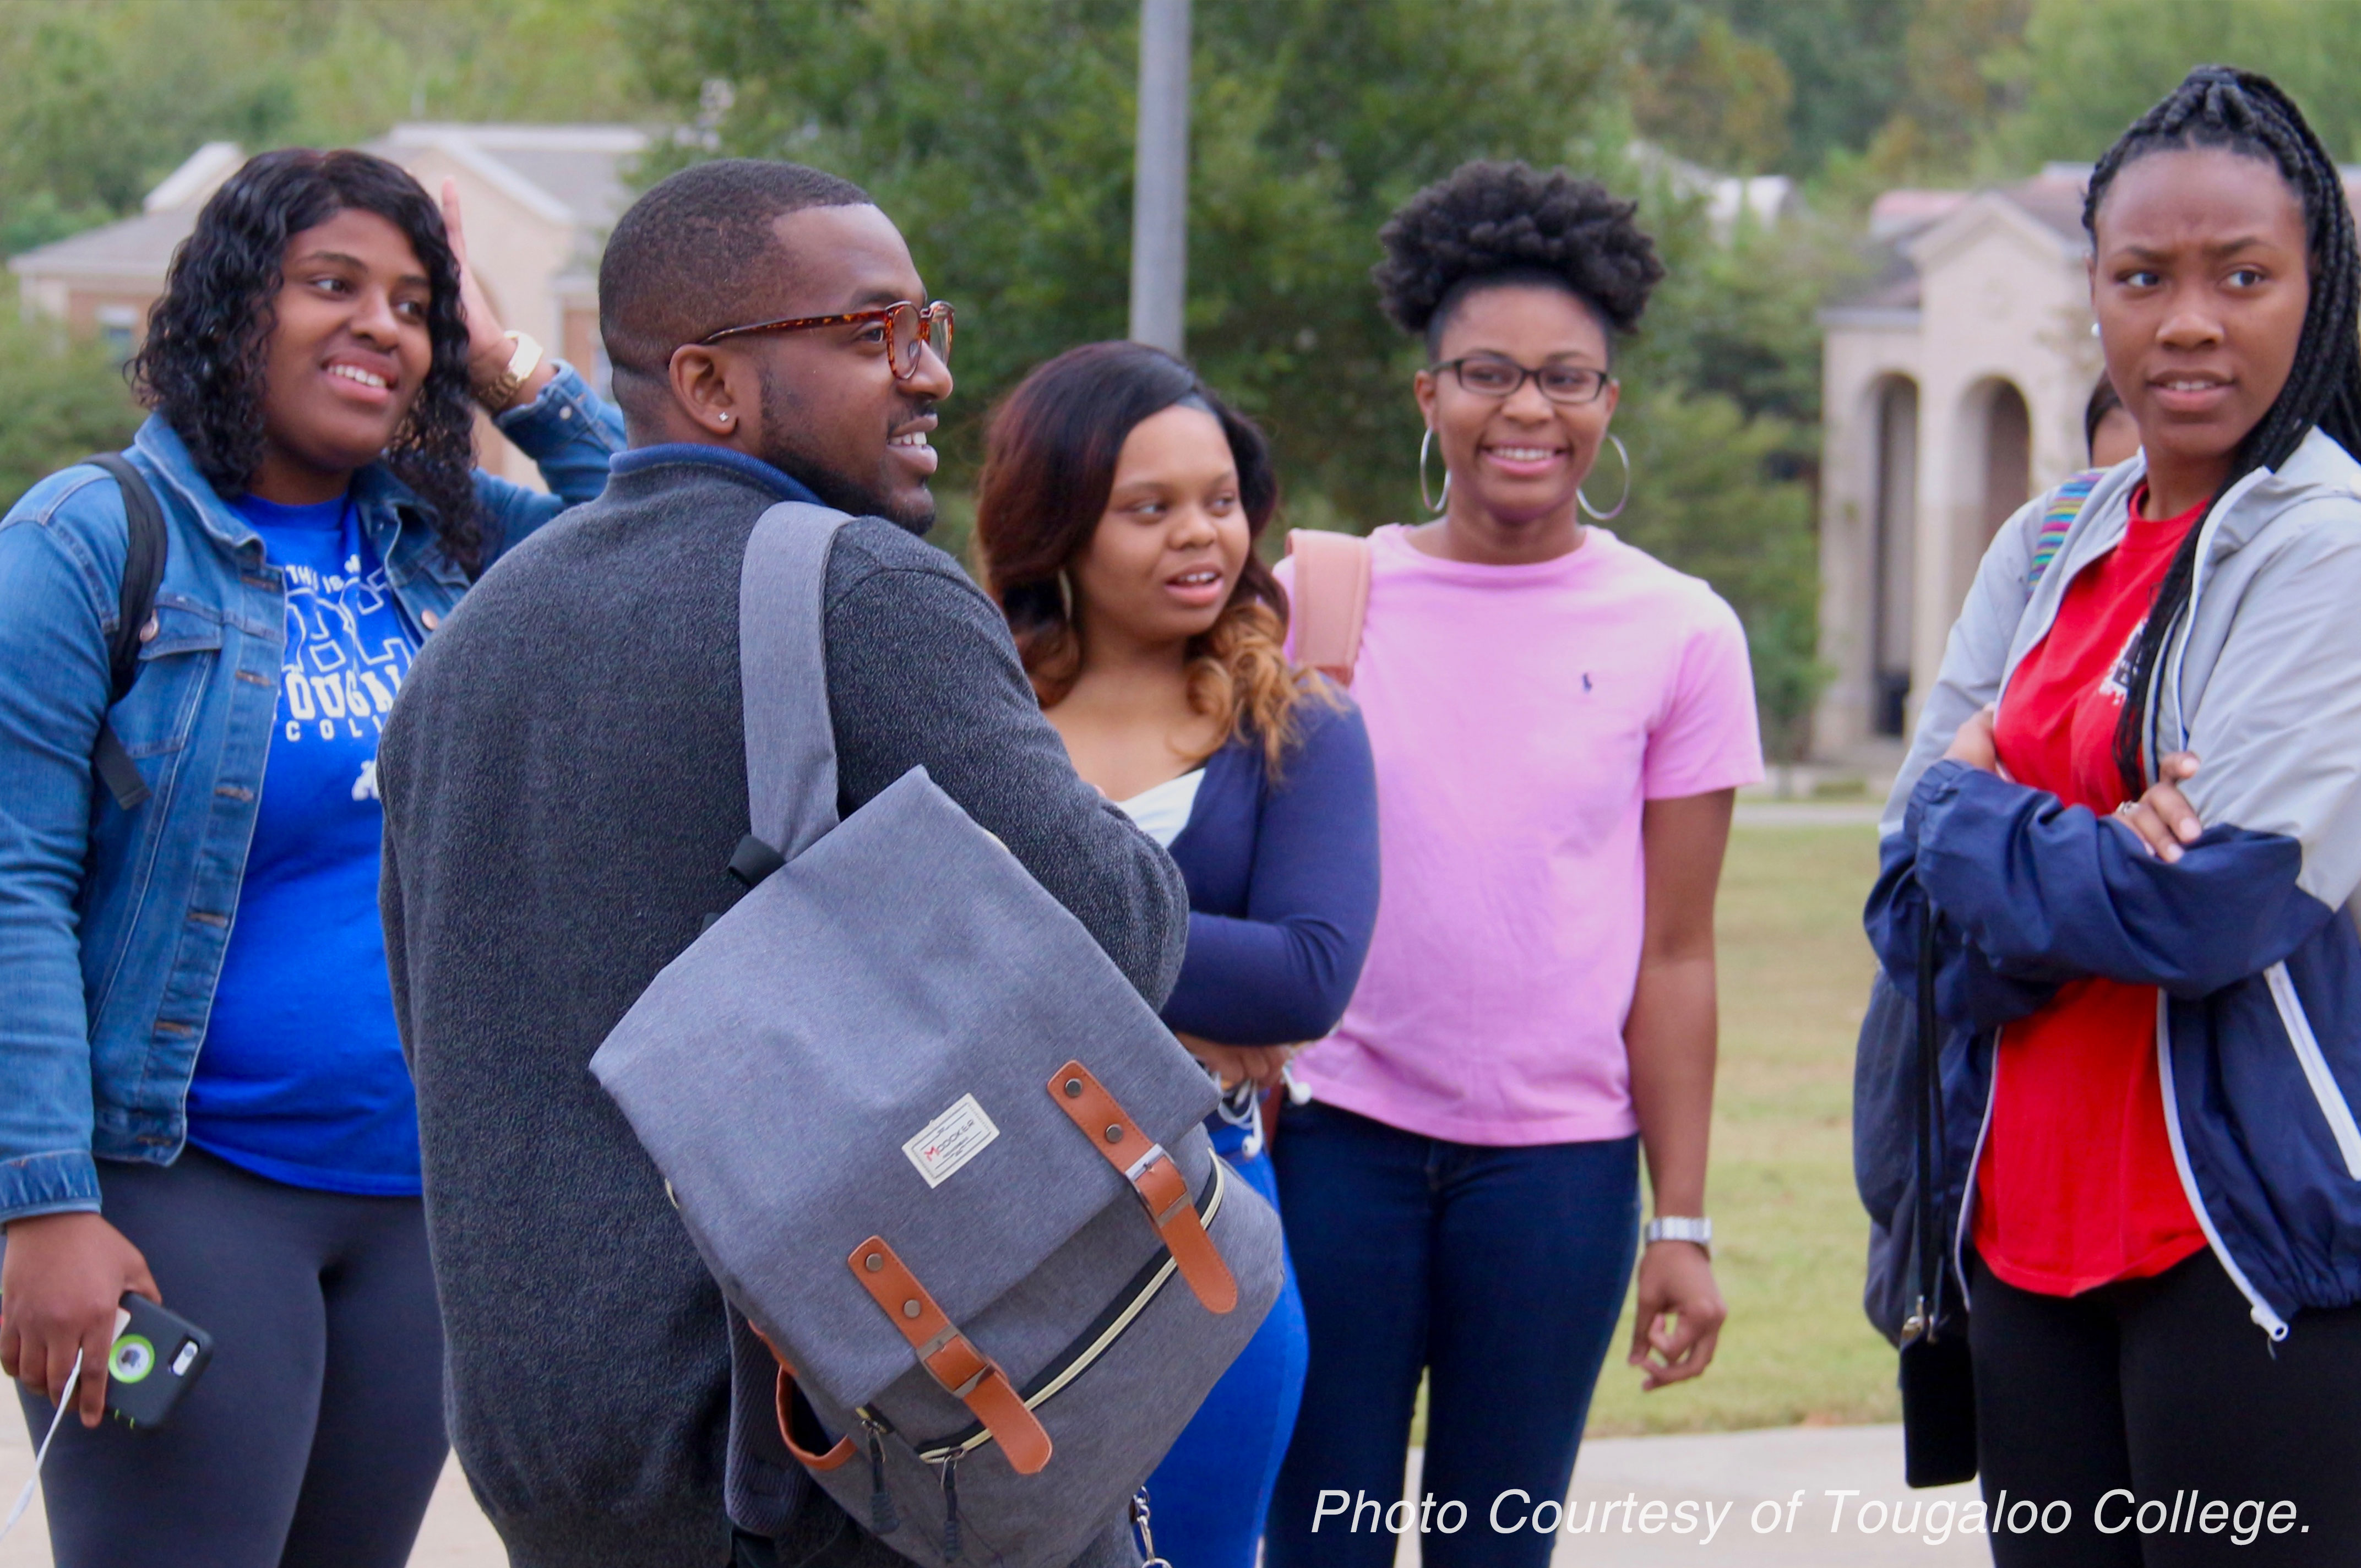 A group of students on campus at Tougaloo College.